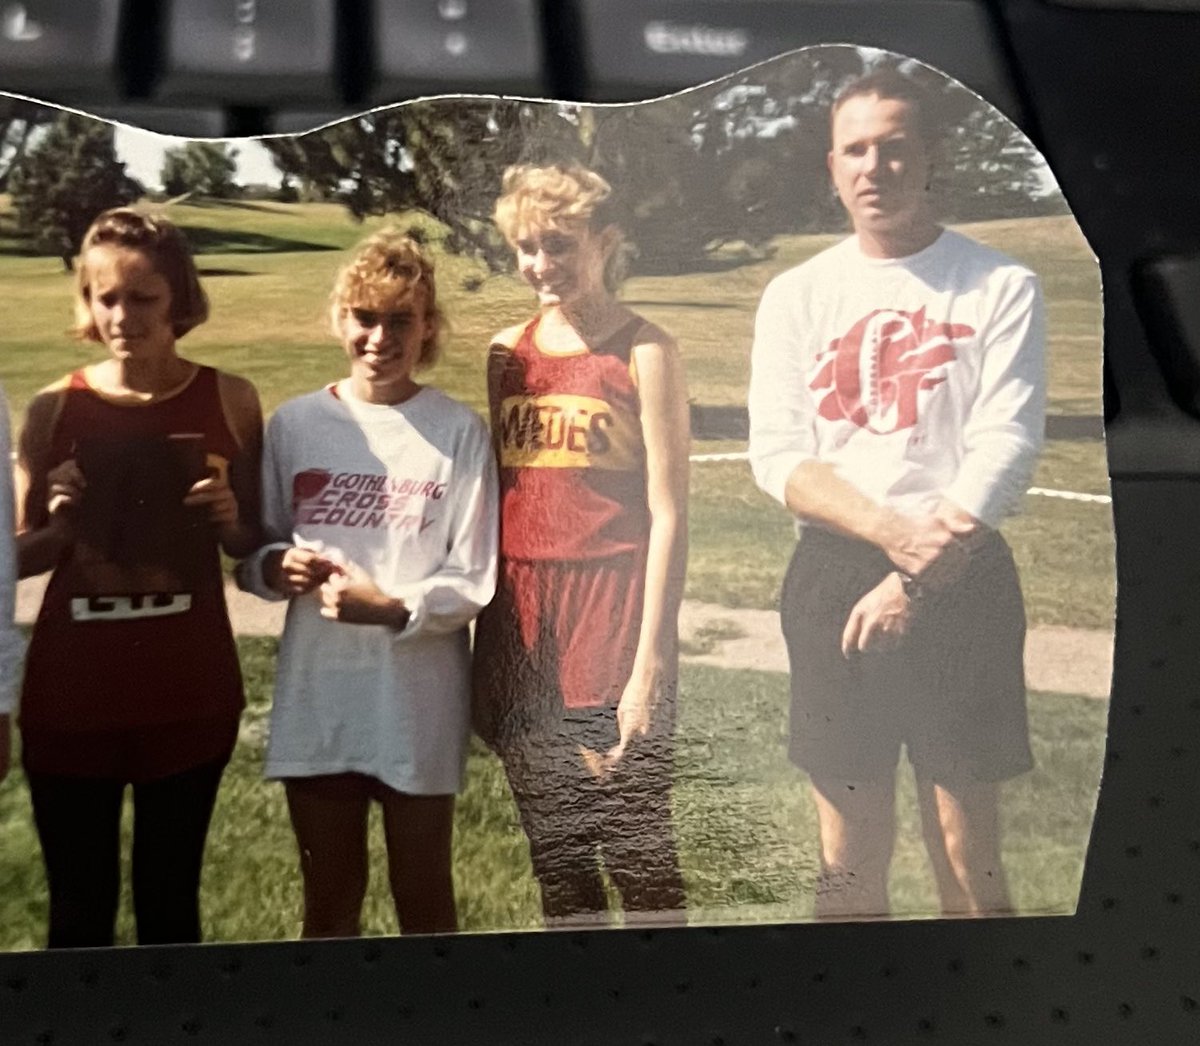 Found this old XC pic from 1989 or 90. The girls on both sides of me were from Brady, a tiny town that didn’t have a team & got to be on ours in Gothenburg. There have been choices for kids in public schools for so long! #ILovePublicSchools #NeLeg @GBurgSwedes